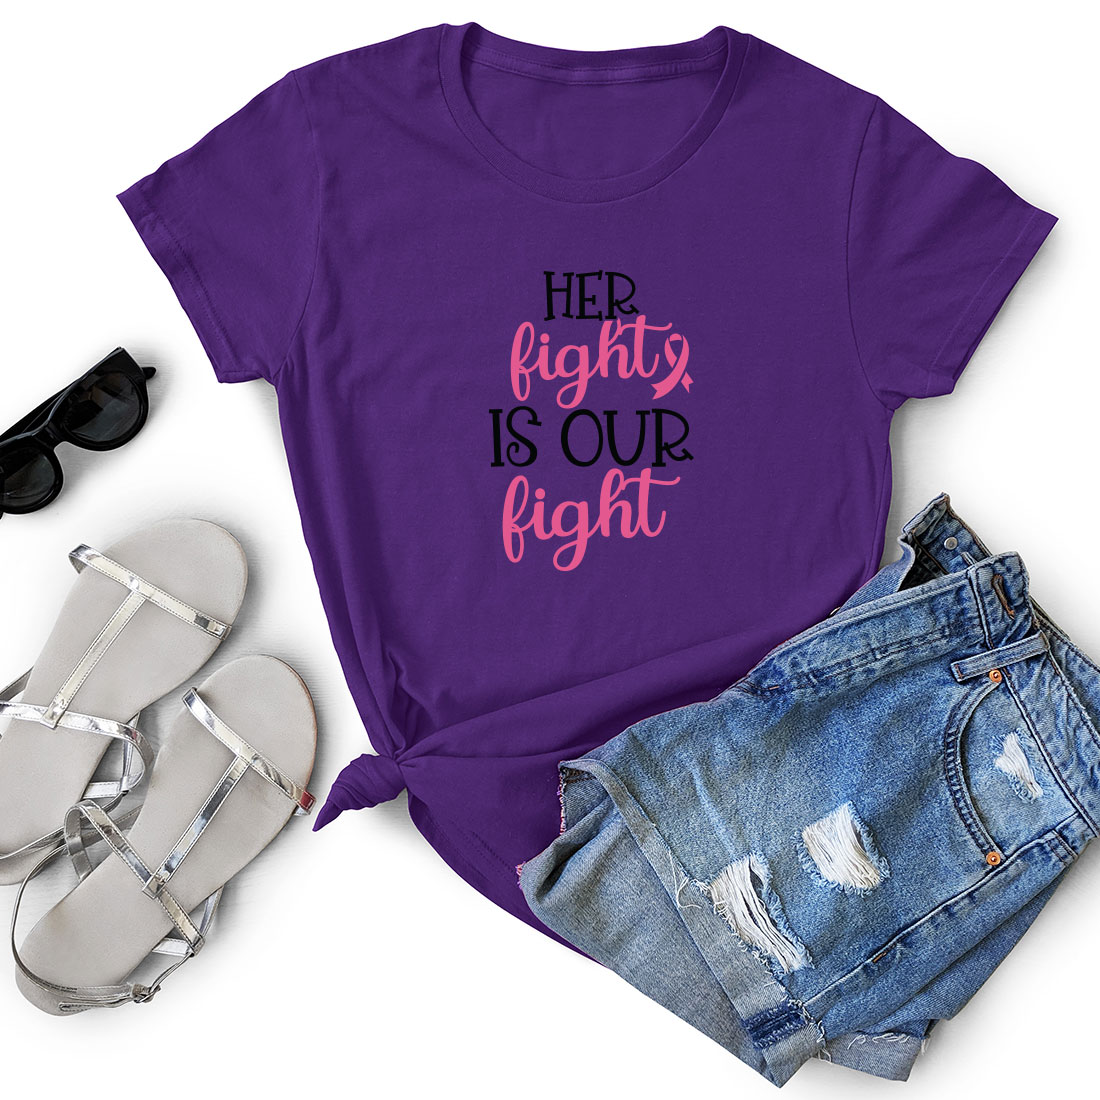 T - shirt that says her fights is our fight.